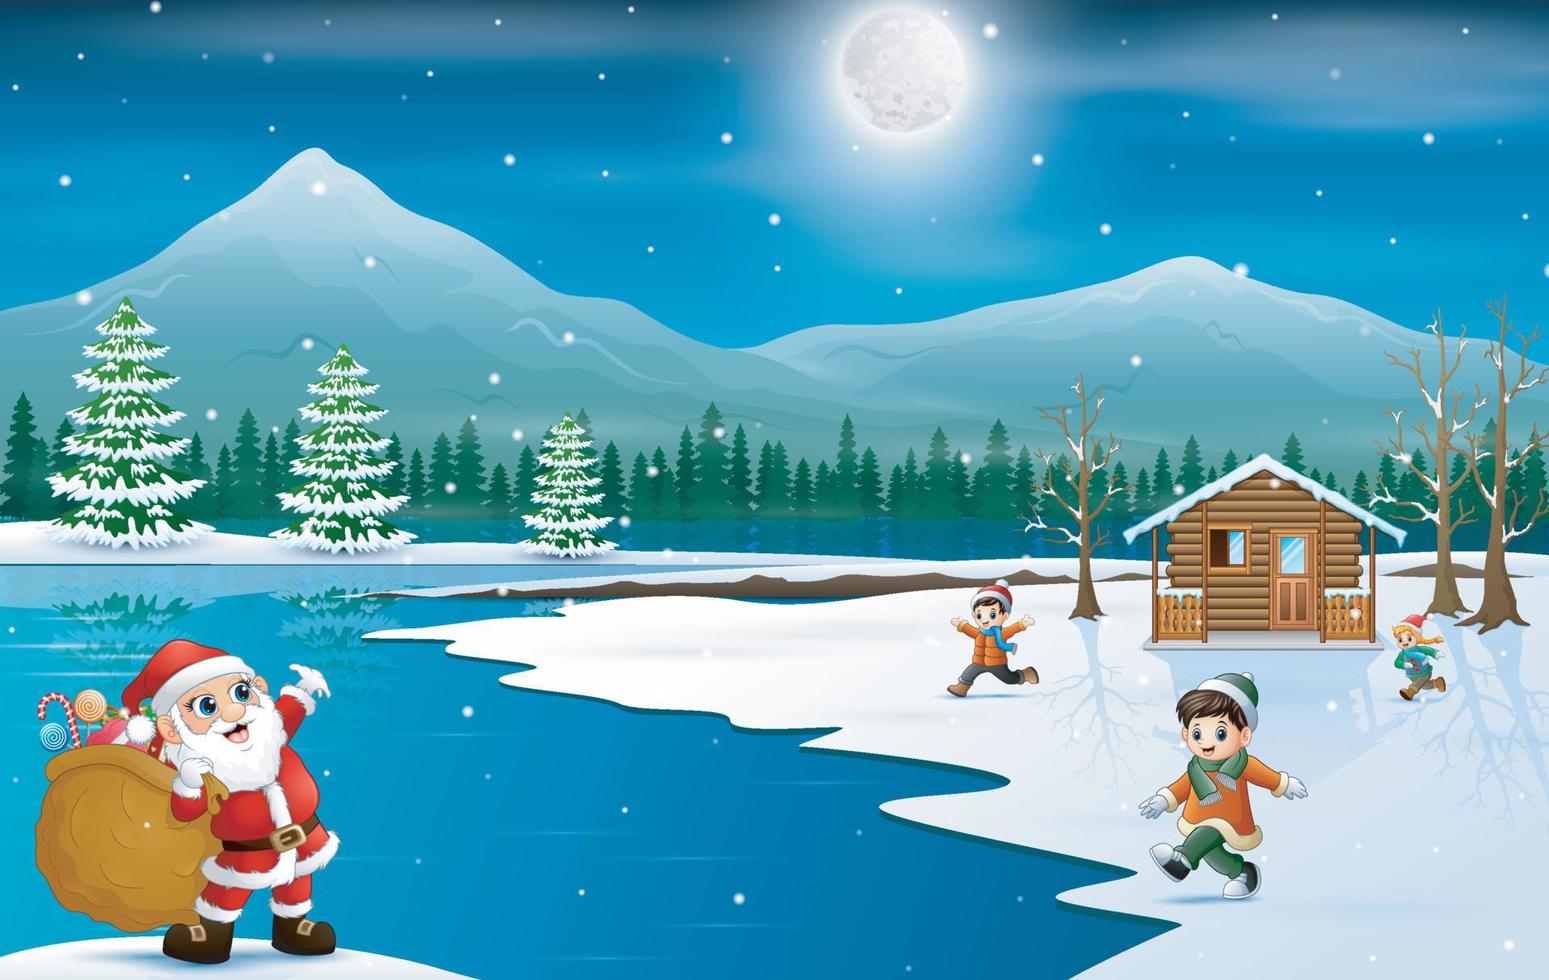 Santa Claus holding sack of gifts to give for children vector